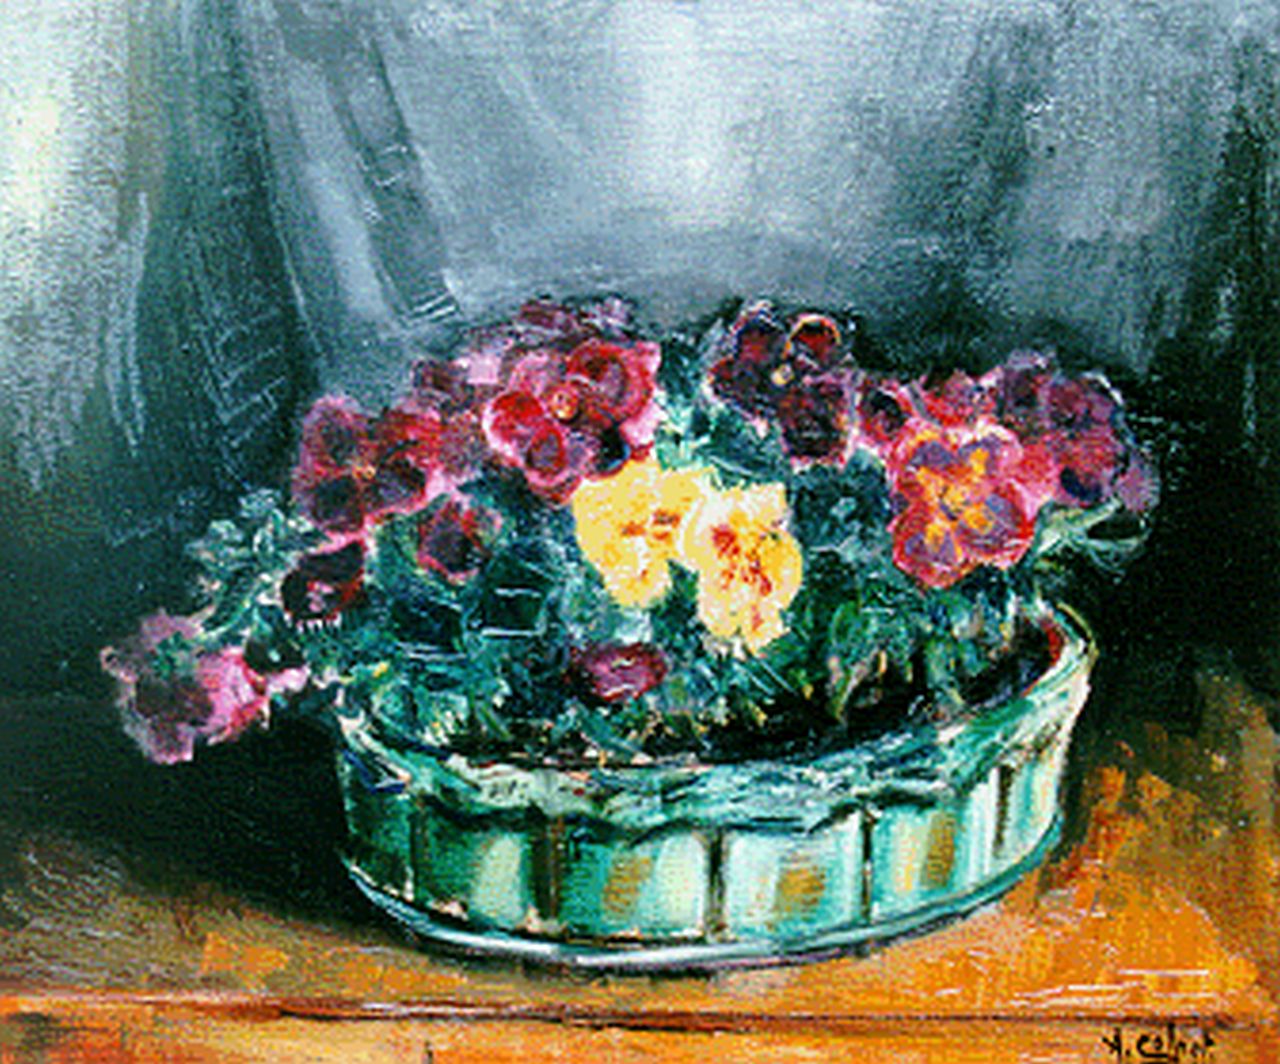 Colnot A.J.G.  | 'Arnout' Jacobus Gustaaf Colnot, Violets in a green basket, oil on canvas 50.0 x 60.0 cm, signed l.r.